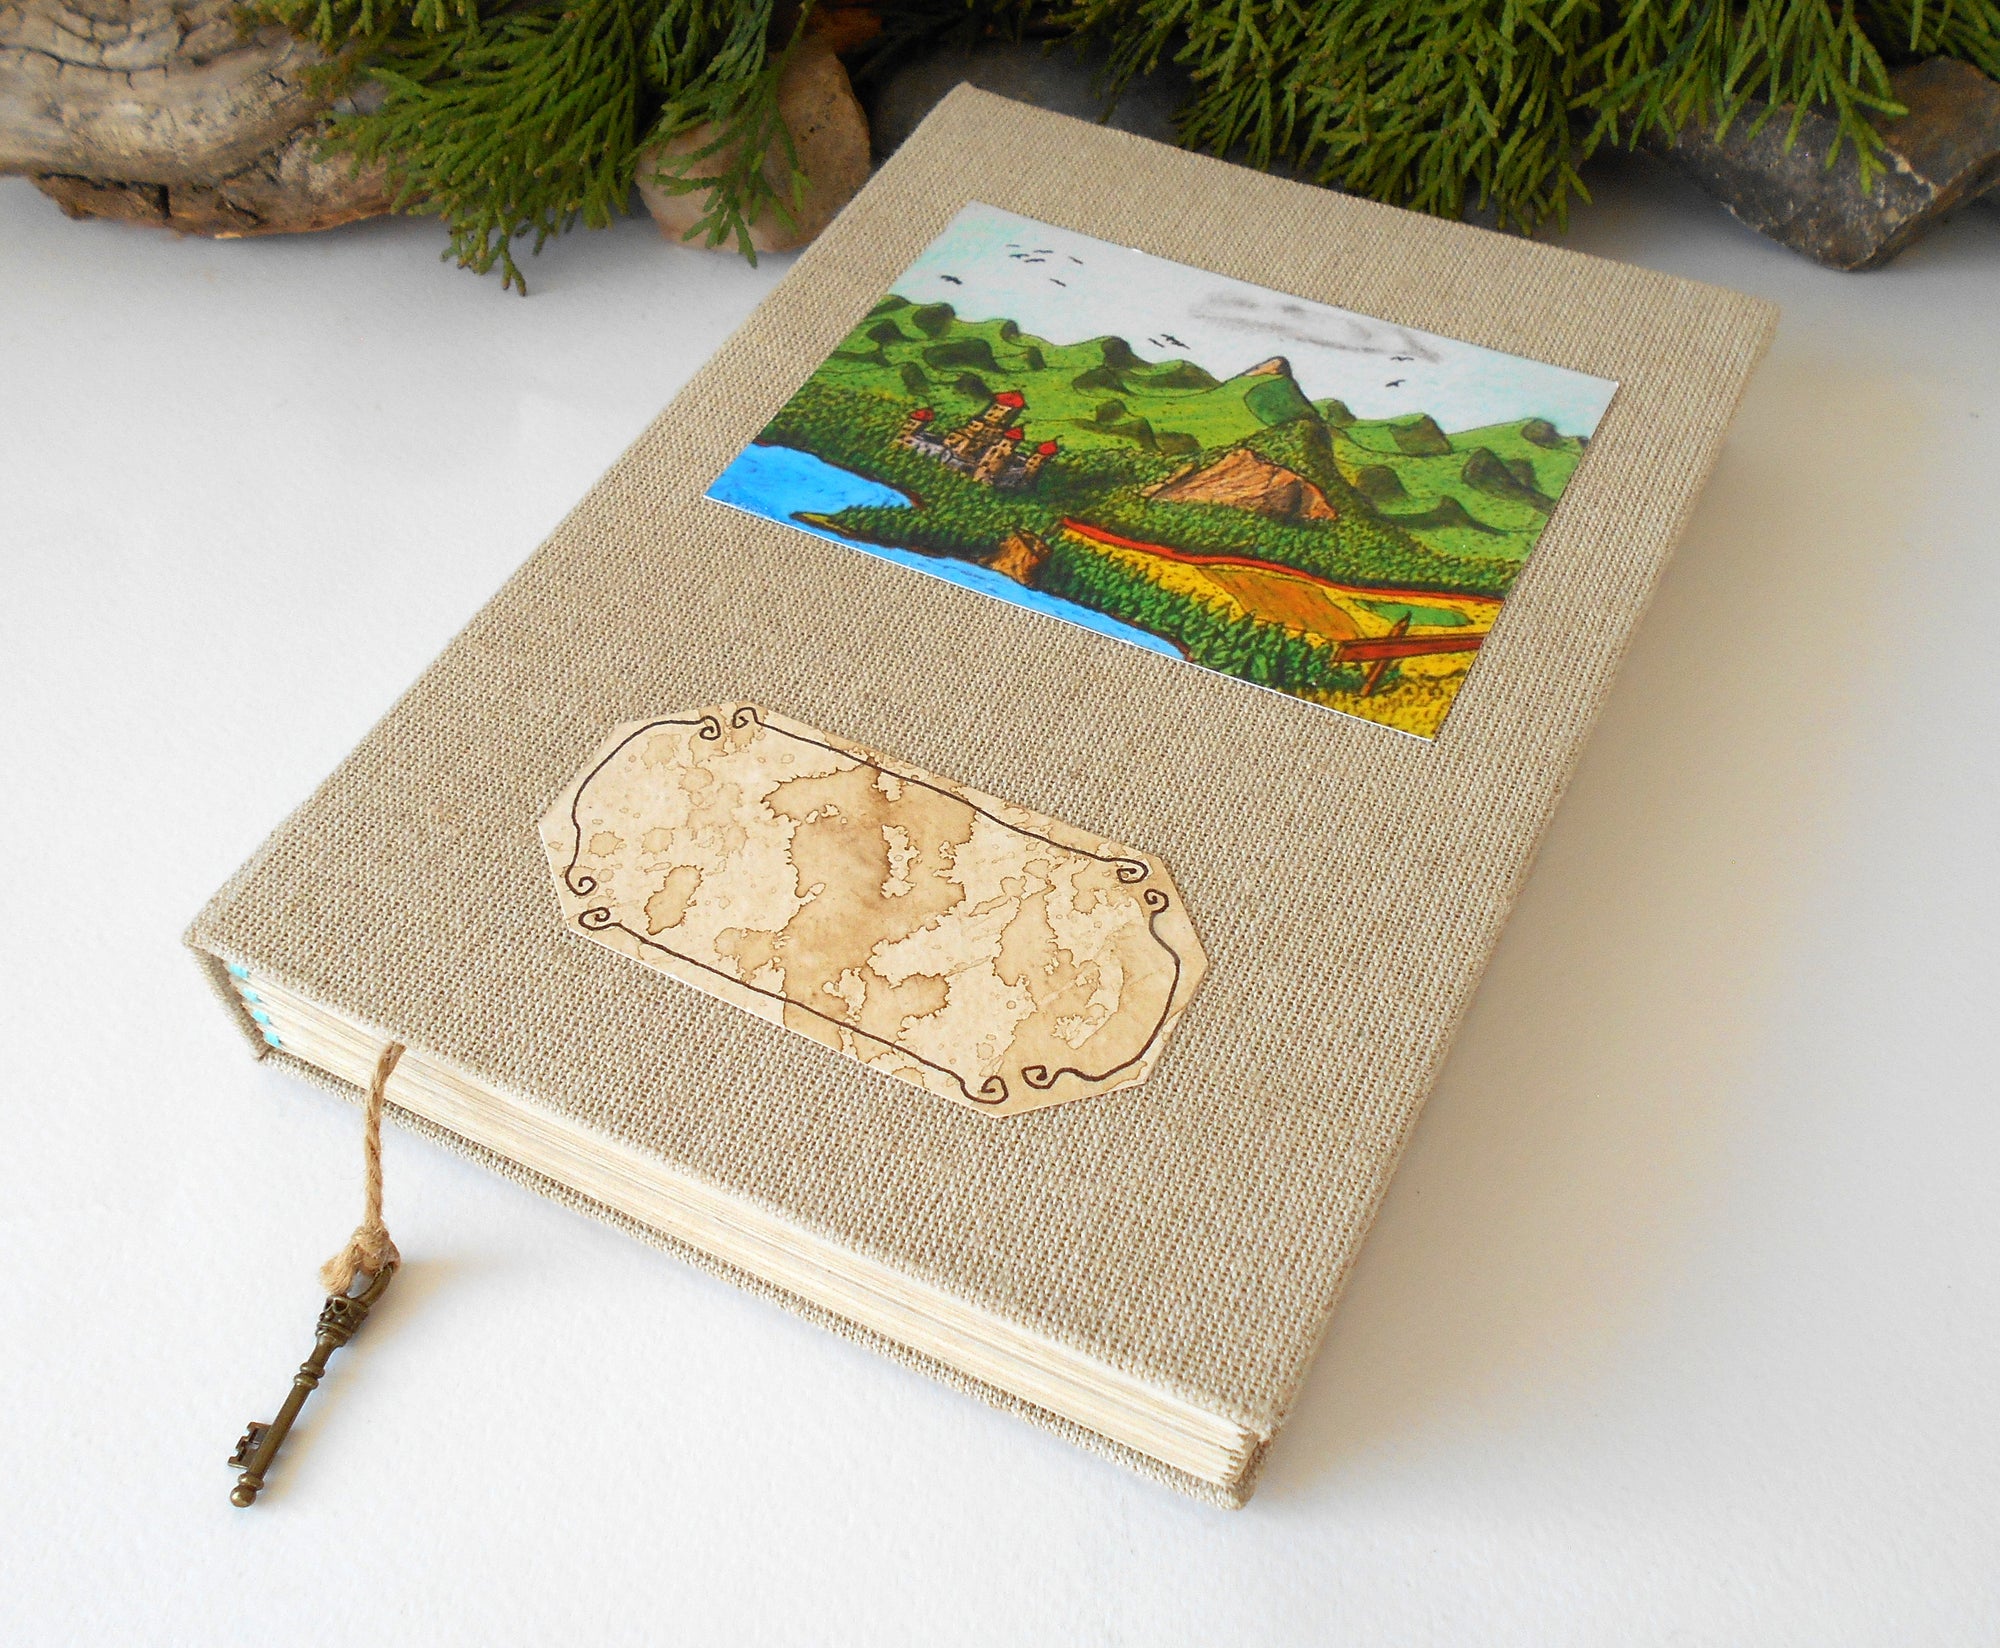 This is a handmade journal with linen fabric hardcovers and a fineÉaster Island heads art print on the front and also an empty coffee-stained title label so you can write your title on it. The art is from my art collection and is titled 'Balkatraz Castle'. This journal is an inspirational book for you to use on the travel, for your daily diary journaling, or also for your planning and sketching of new projects and new poetry or novels.